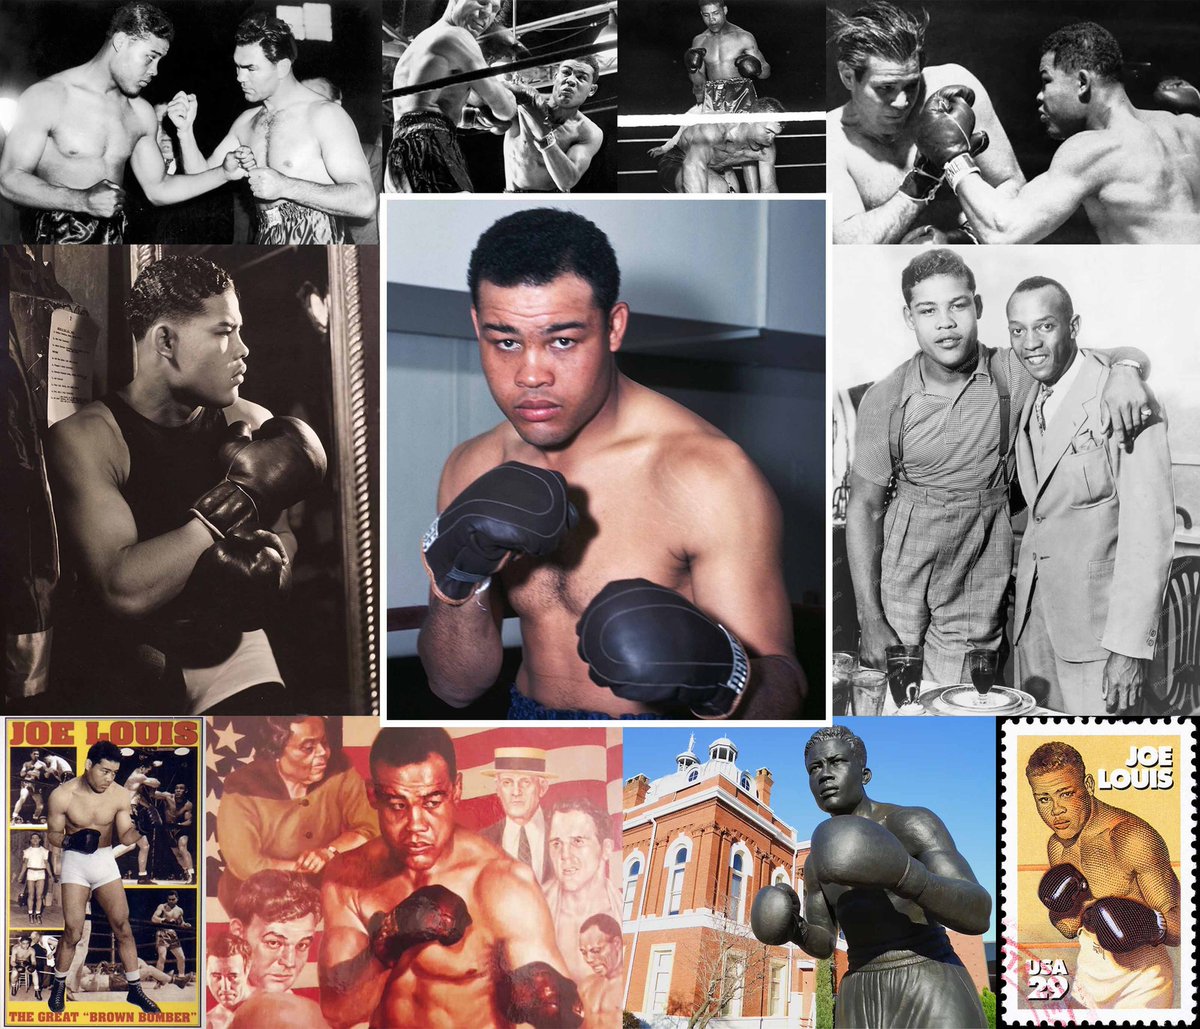 Joe Louis (13 May 1914 - 12 Apr 1981) Legendary American boxer, born Joseph Louis Barrow 110 years ago today, in LaFayette, Alabama. “America’s first black national hero”; widely regarded as first person of African descent to achieve the status of nationwide hero in the United…